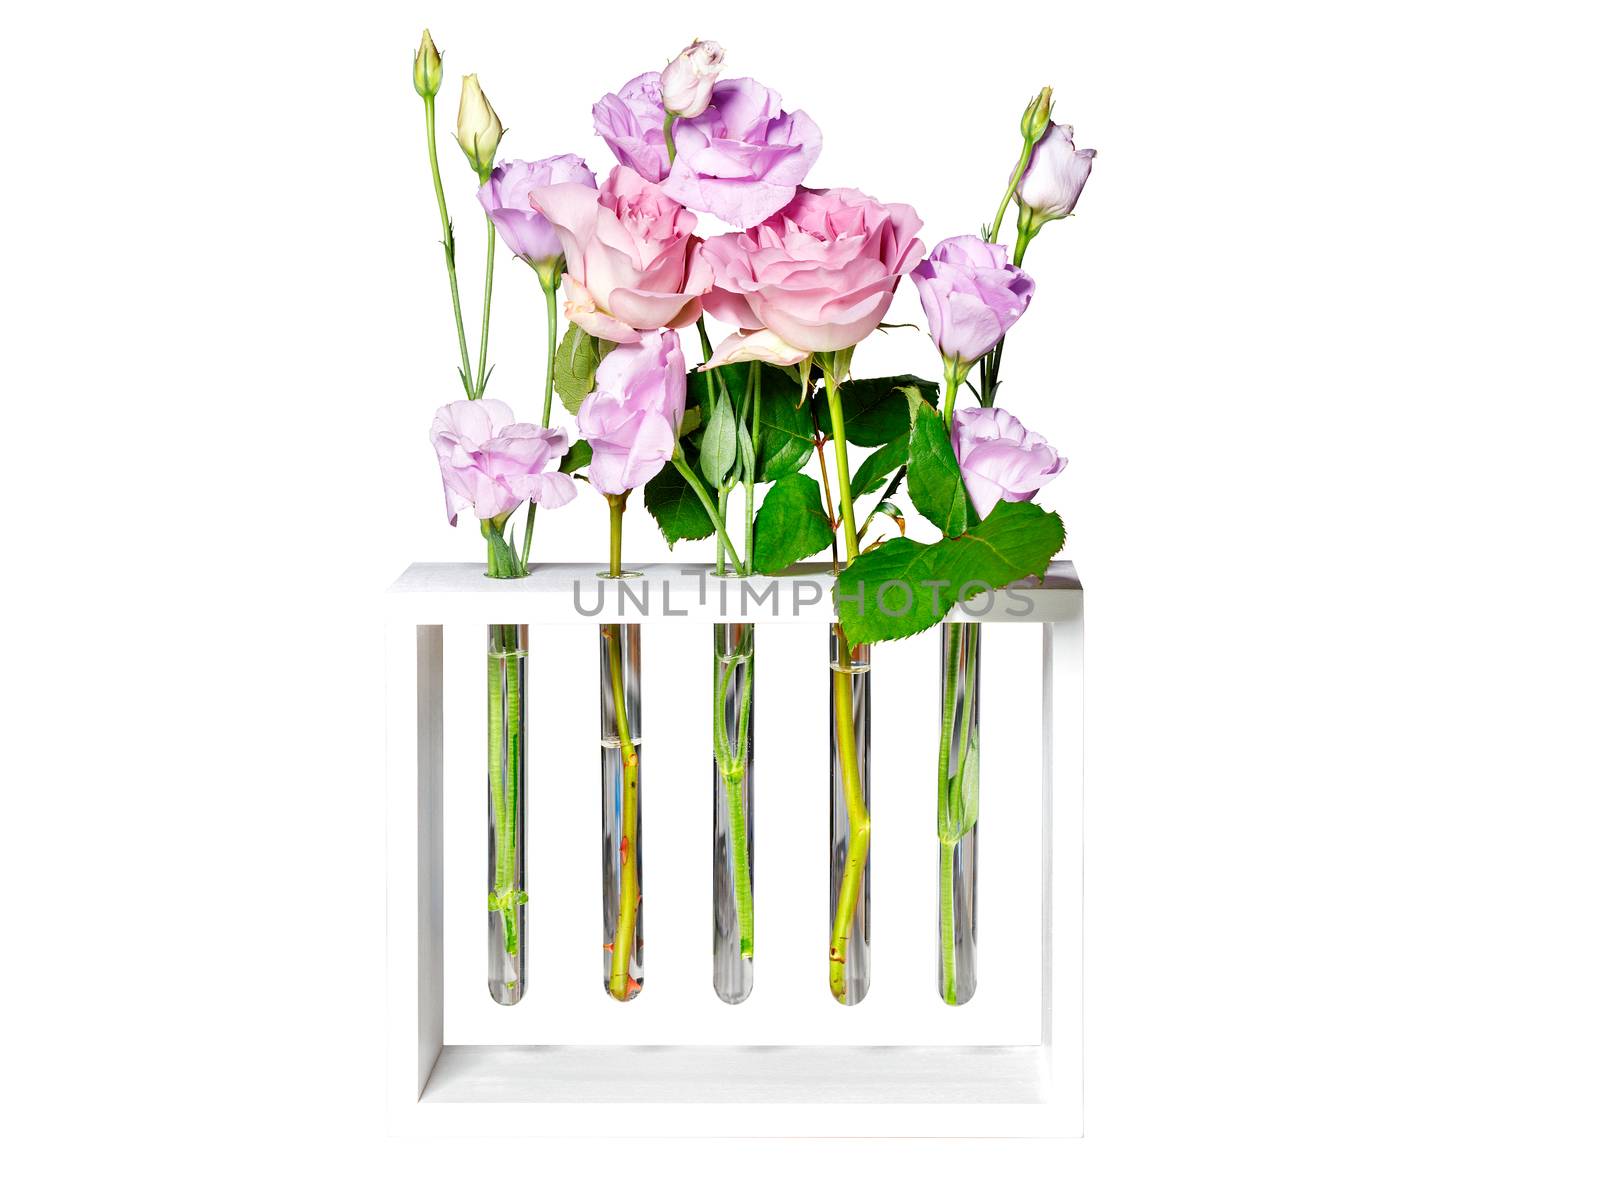 Beautiful rose buds blooming in glass test tubes, isolated on white background. by Sergii